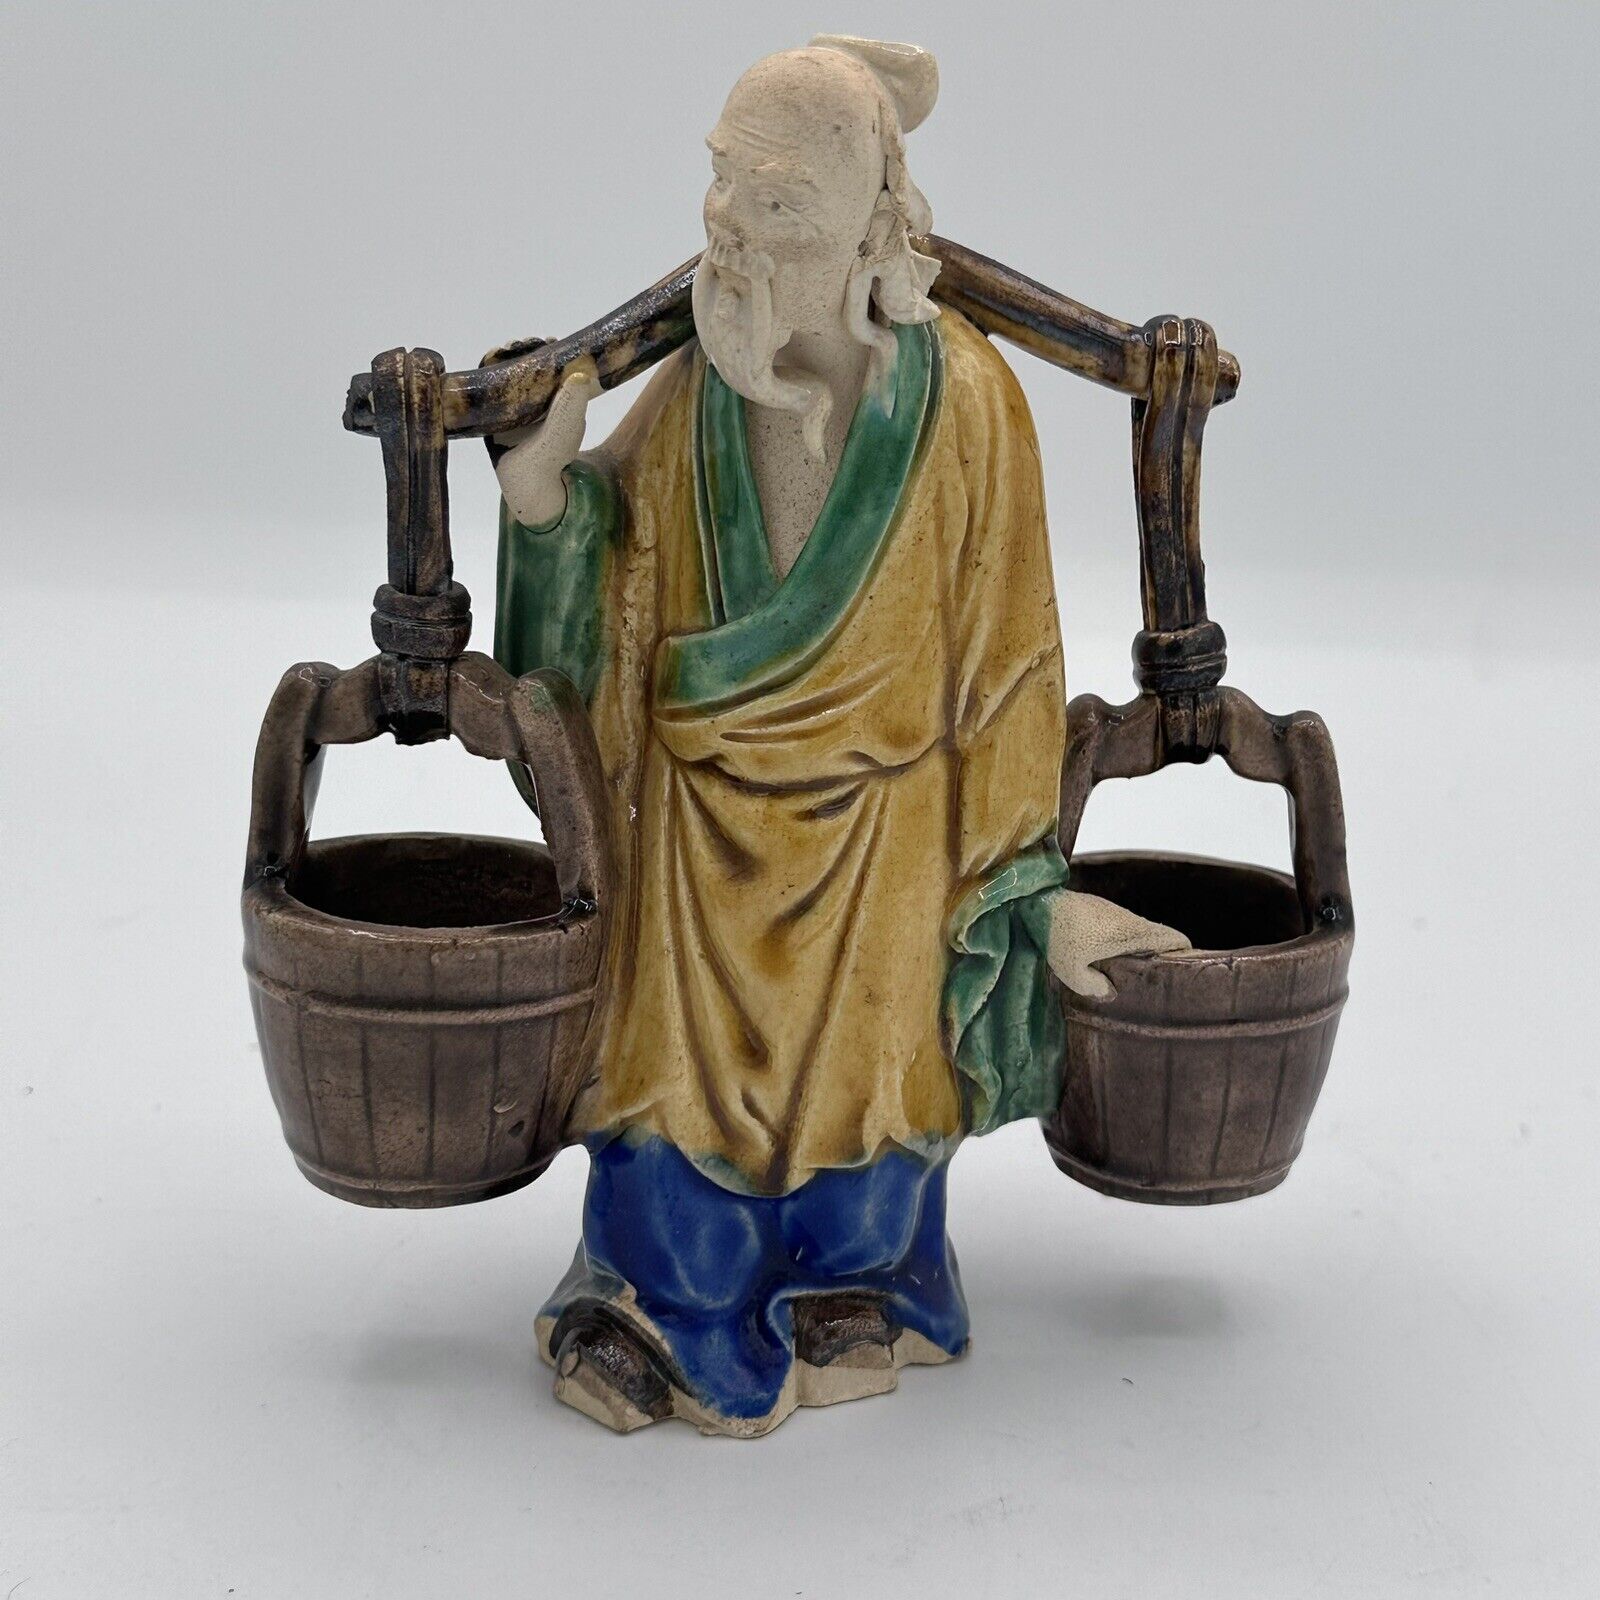 Vintage Chinese Mudman Ceramic Figurine With Yoke And Buckets Stamped Detailed